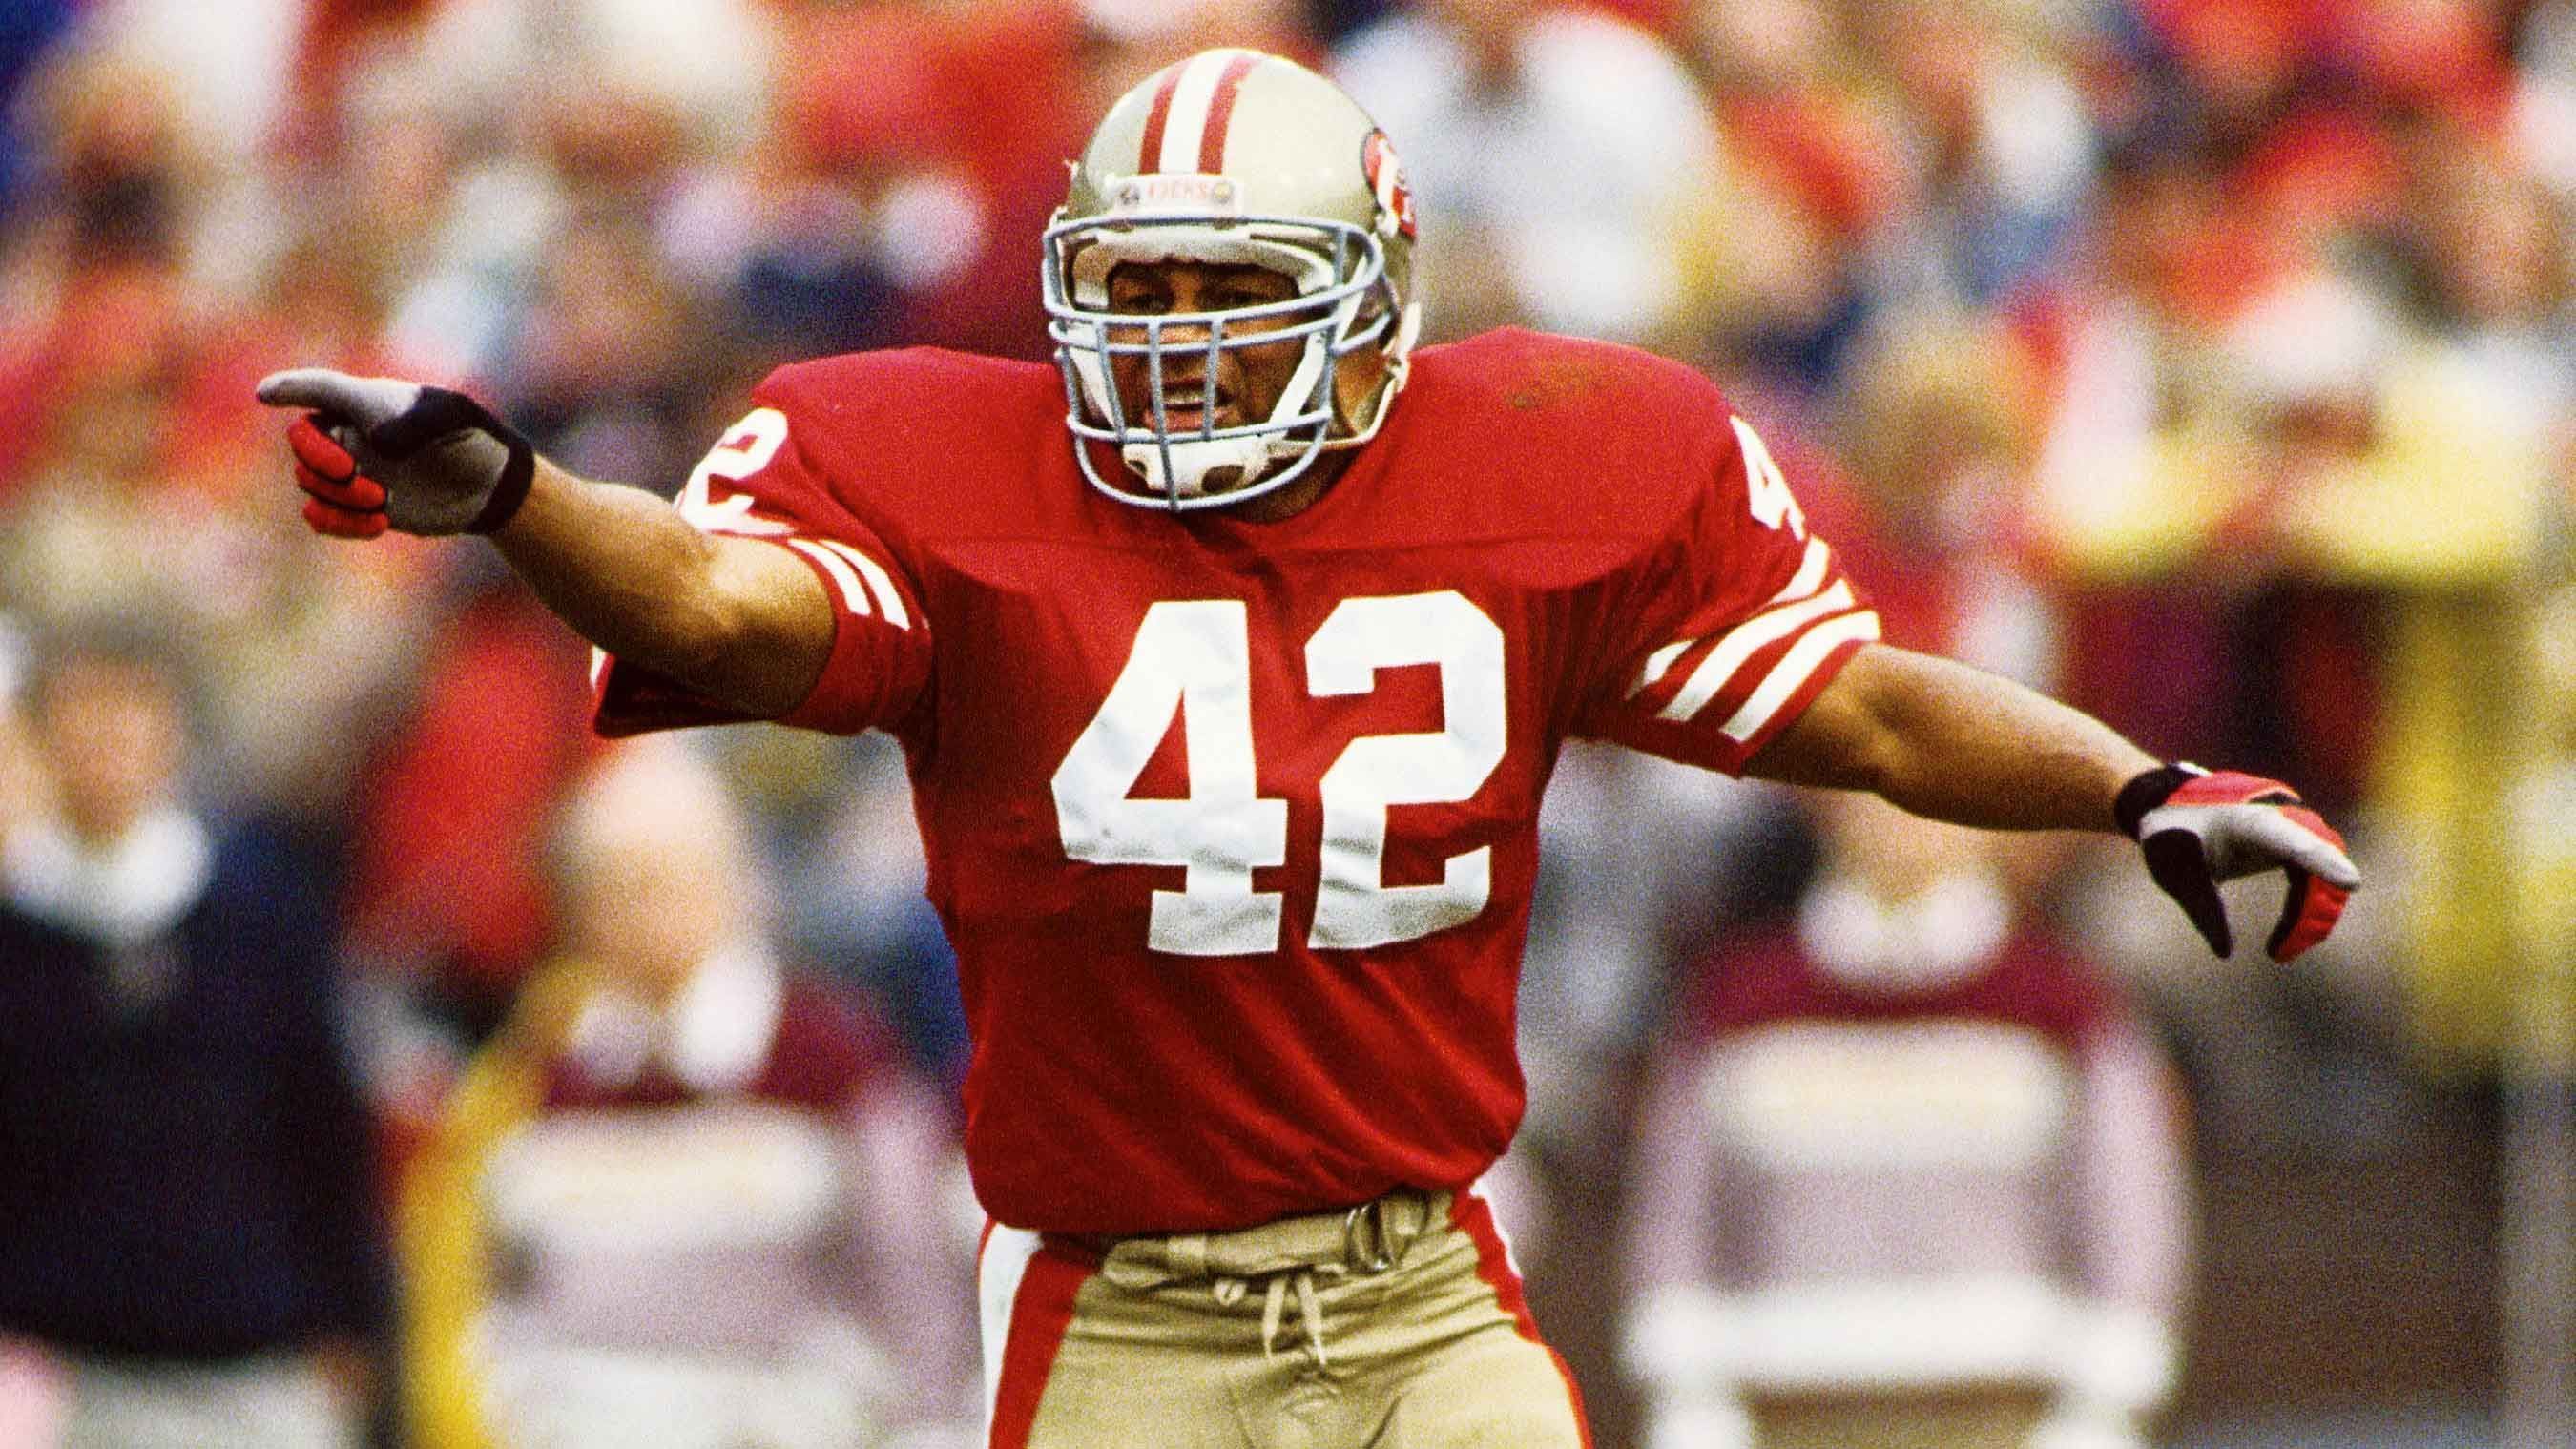 <strong>42: Ronnie Lott</strong><br>Teams: San Francisco 49ers, Los Angeles Raiders, New York Jets<br>Position: Safety<br>Erfolge: Pro Football Hall of Famer, viermaliger Super-Bowl-Champion, sechsmaliger All-Pro, zehnmaliger Pro Bowler<br>Honorable Mentions: Johnny Robinson, Sid Luckman
